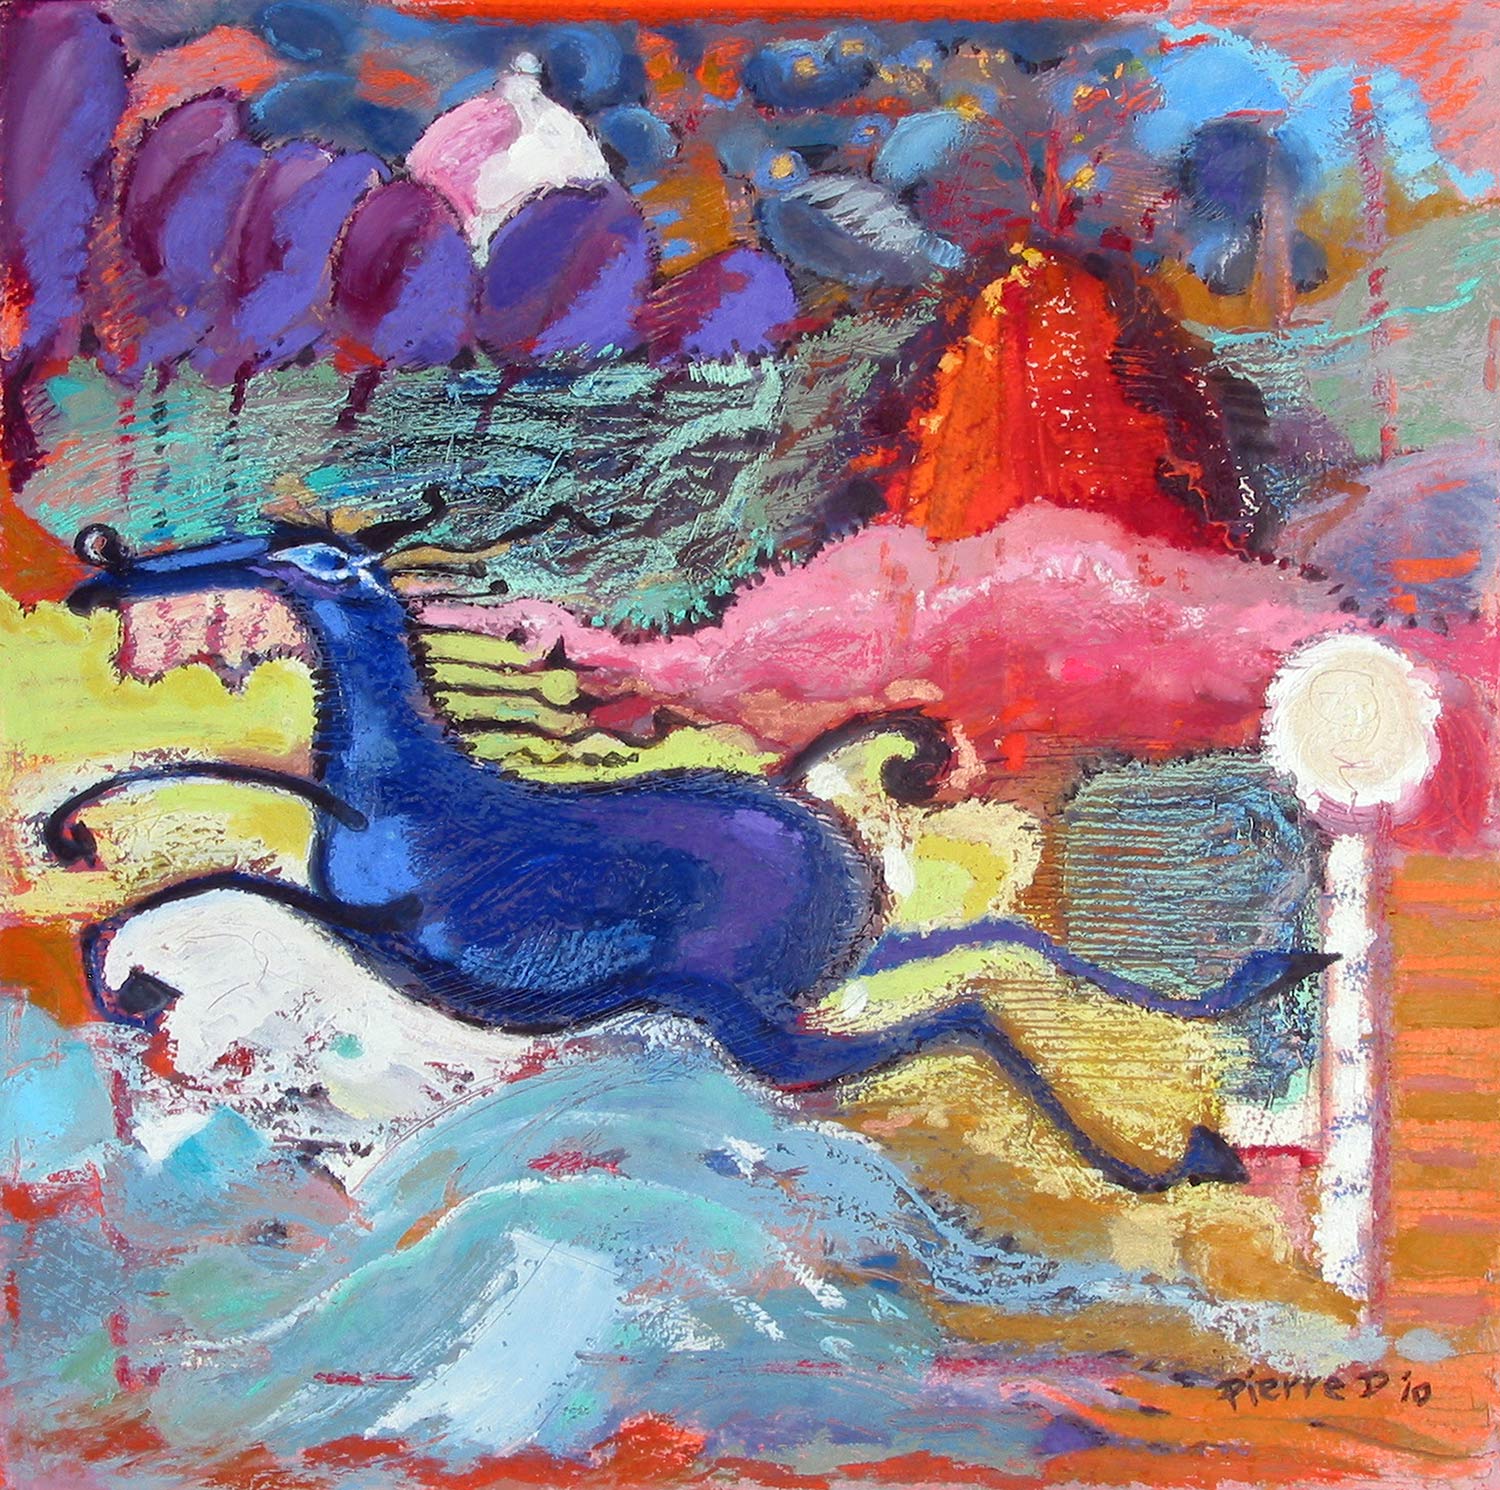  The Blueberry Horse &nbsp; ©  Oil and oil pastel on fine paper  38 cm high x 38 cm wide  "I was taken by the blueberry bloom of the background trees and built the palette around those.  This horse bolts freely from everything I know about horse anat